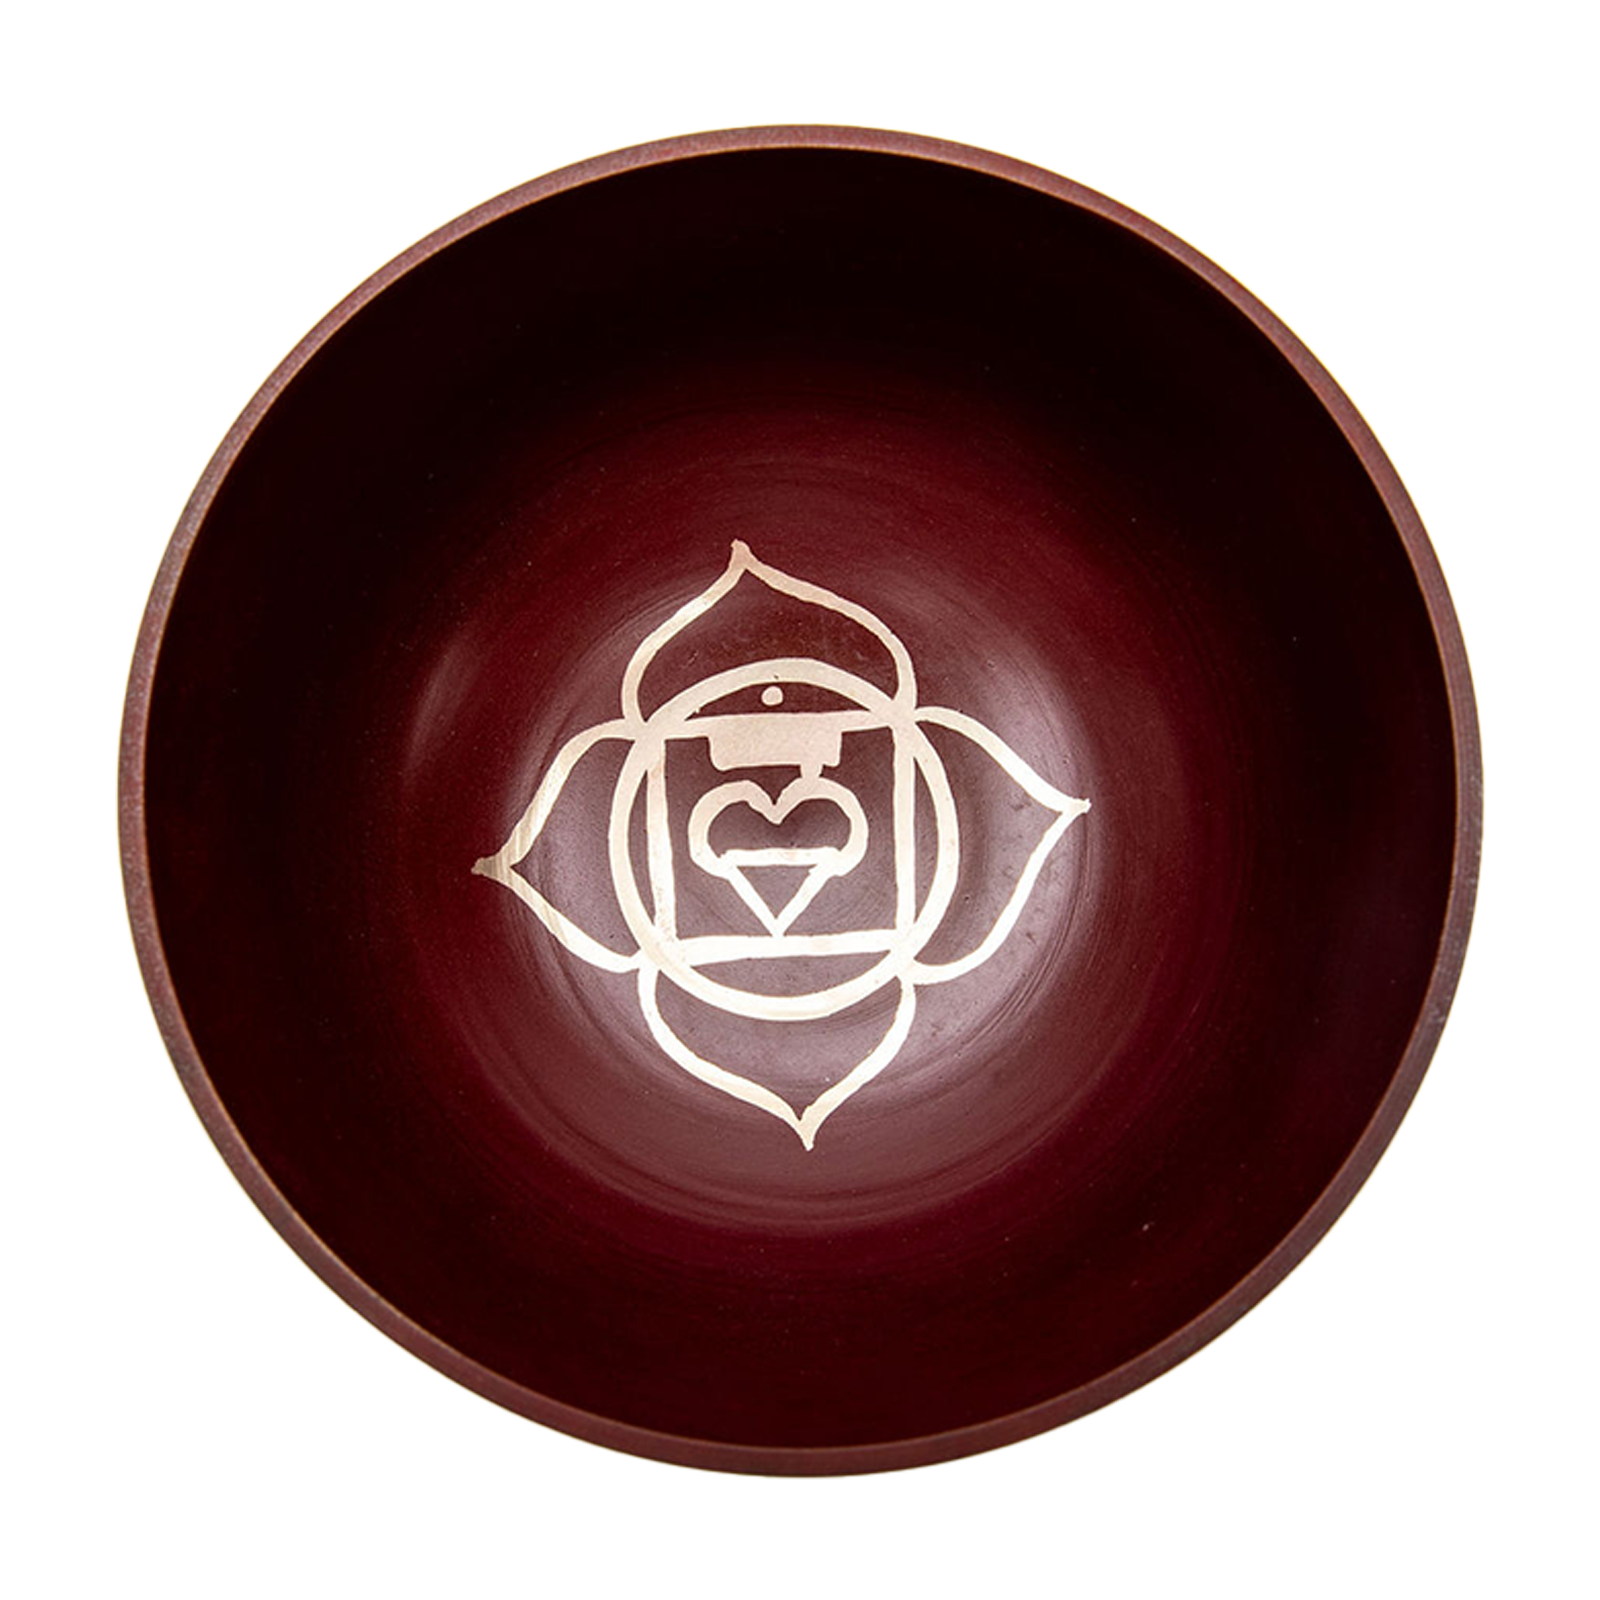 Inside view of the red chakra (root chakra) bowl on a white backdrop.